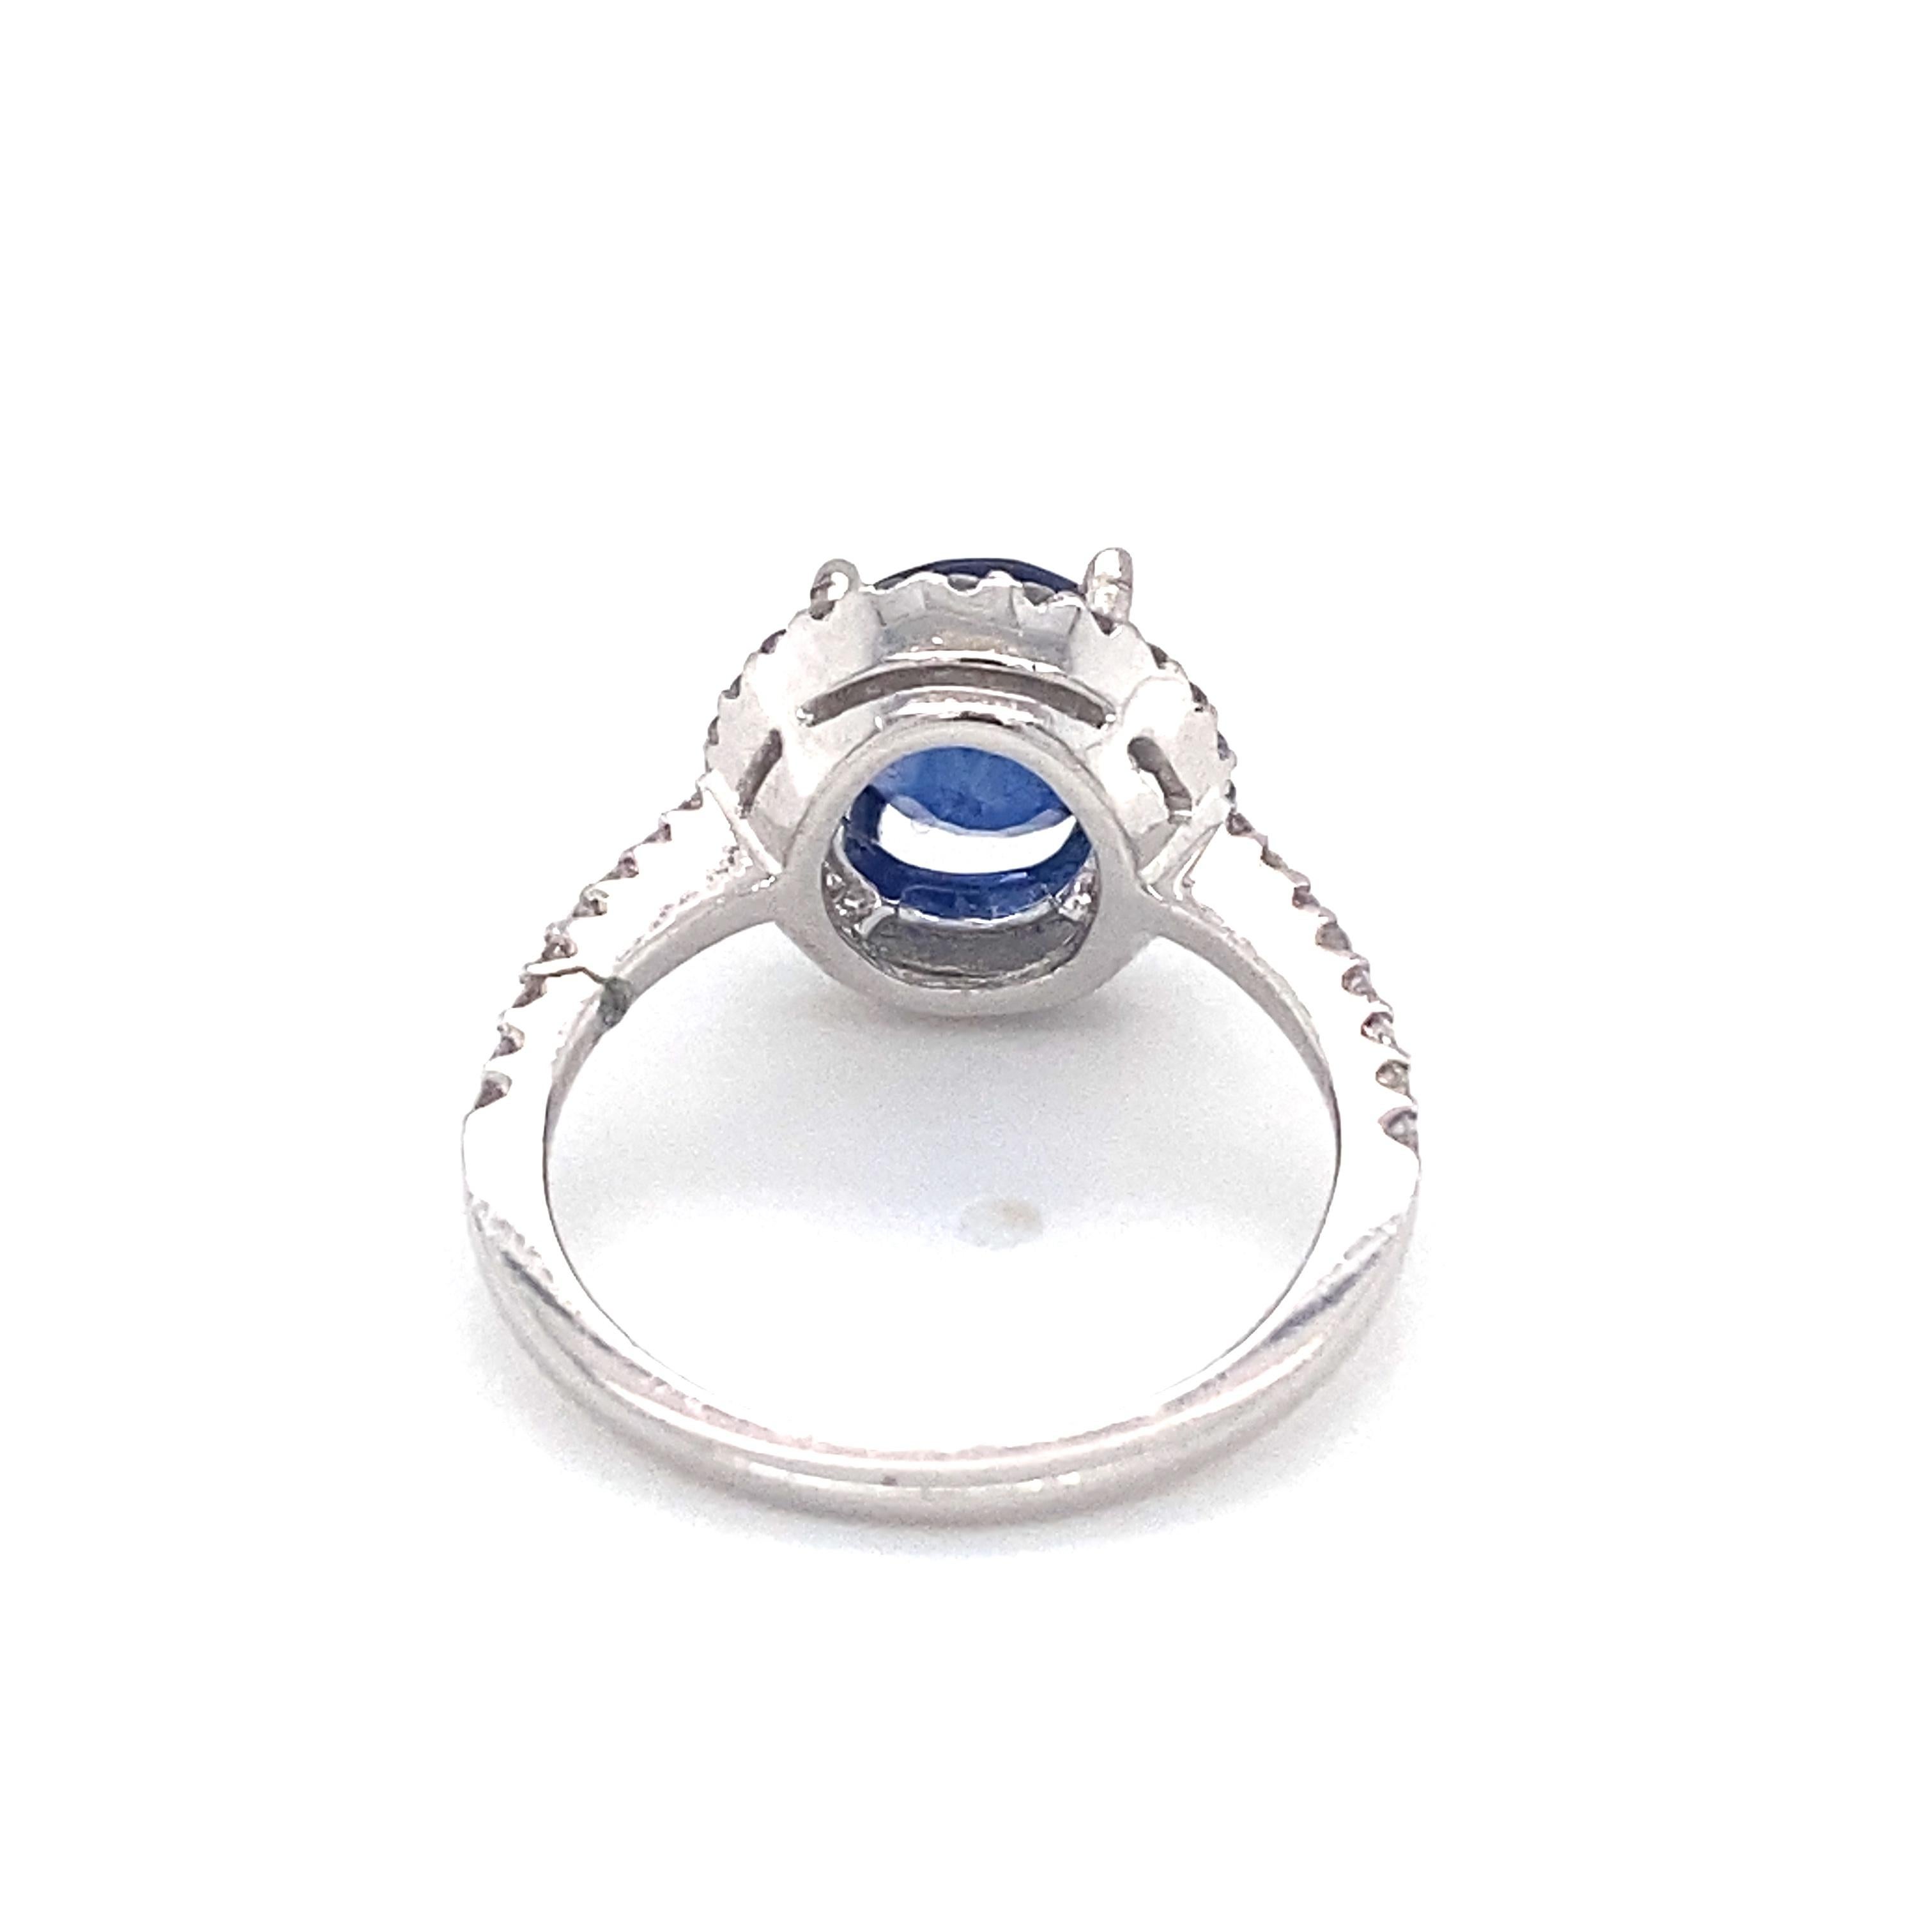 Item Details: This ring features a spectacular sapphire originating from Sri Lanka and has no heat or additional treatment. A beautiful ring with a one of a kind stone!

Circa: 1990s
Metal Type: Platinum
Weight: 6.4 grams
Size: US 6.5,